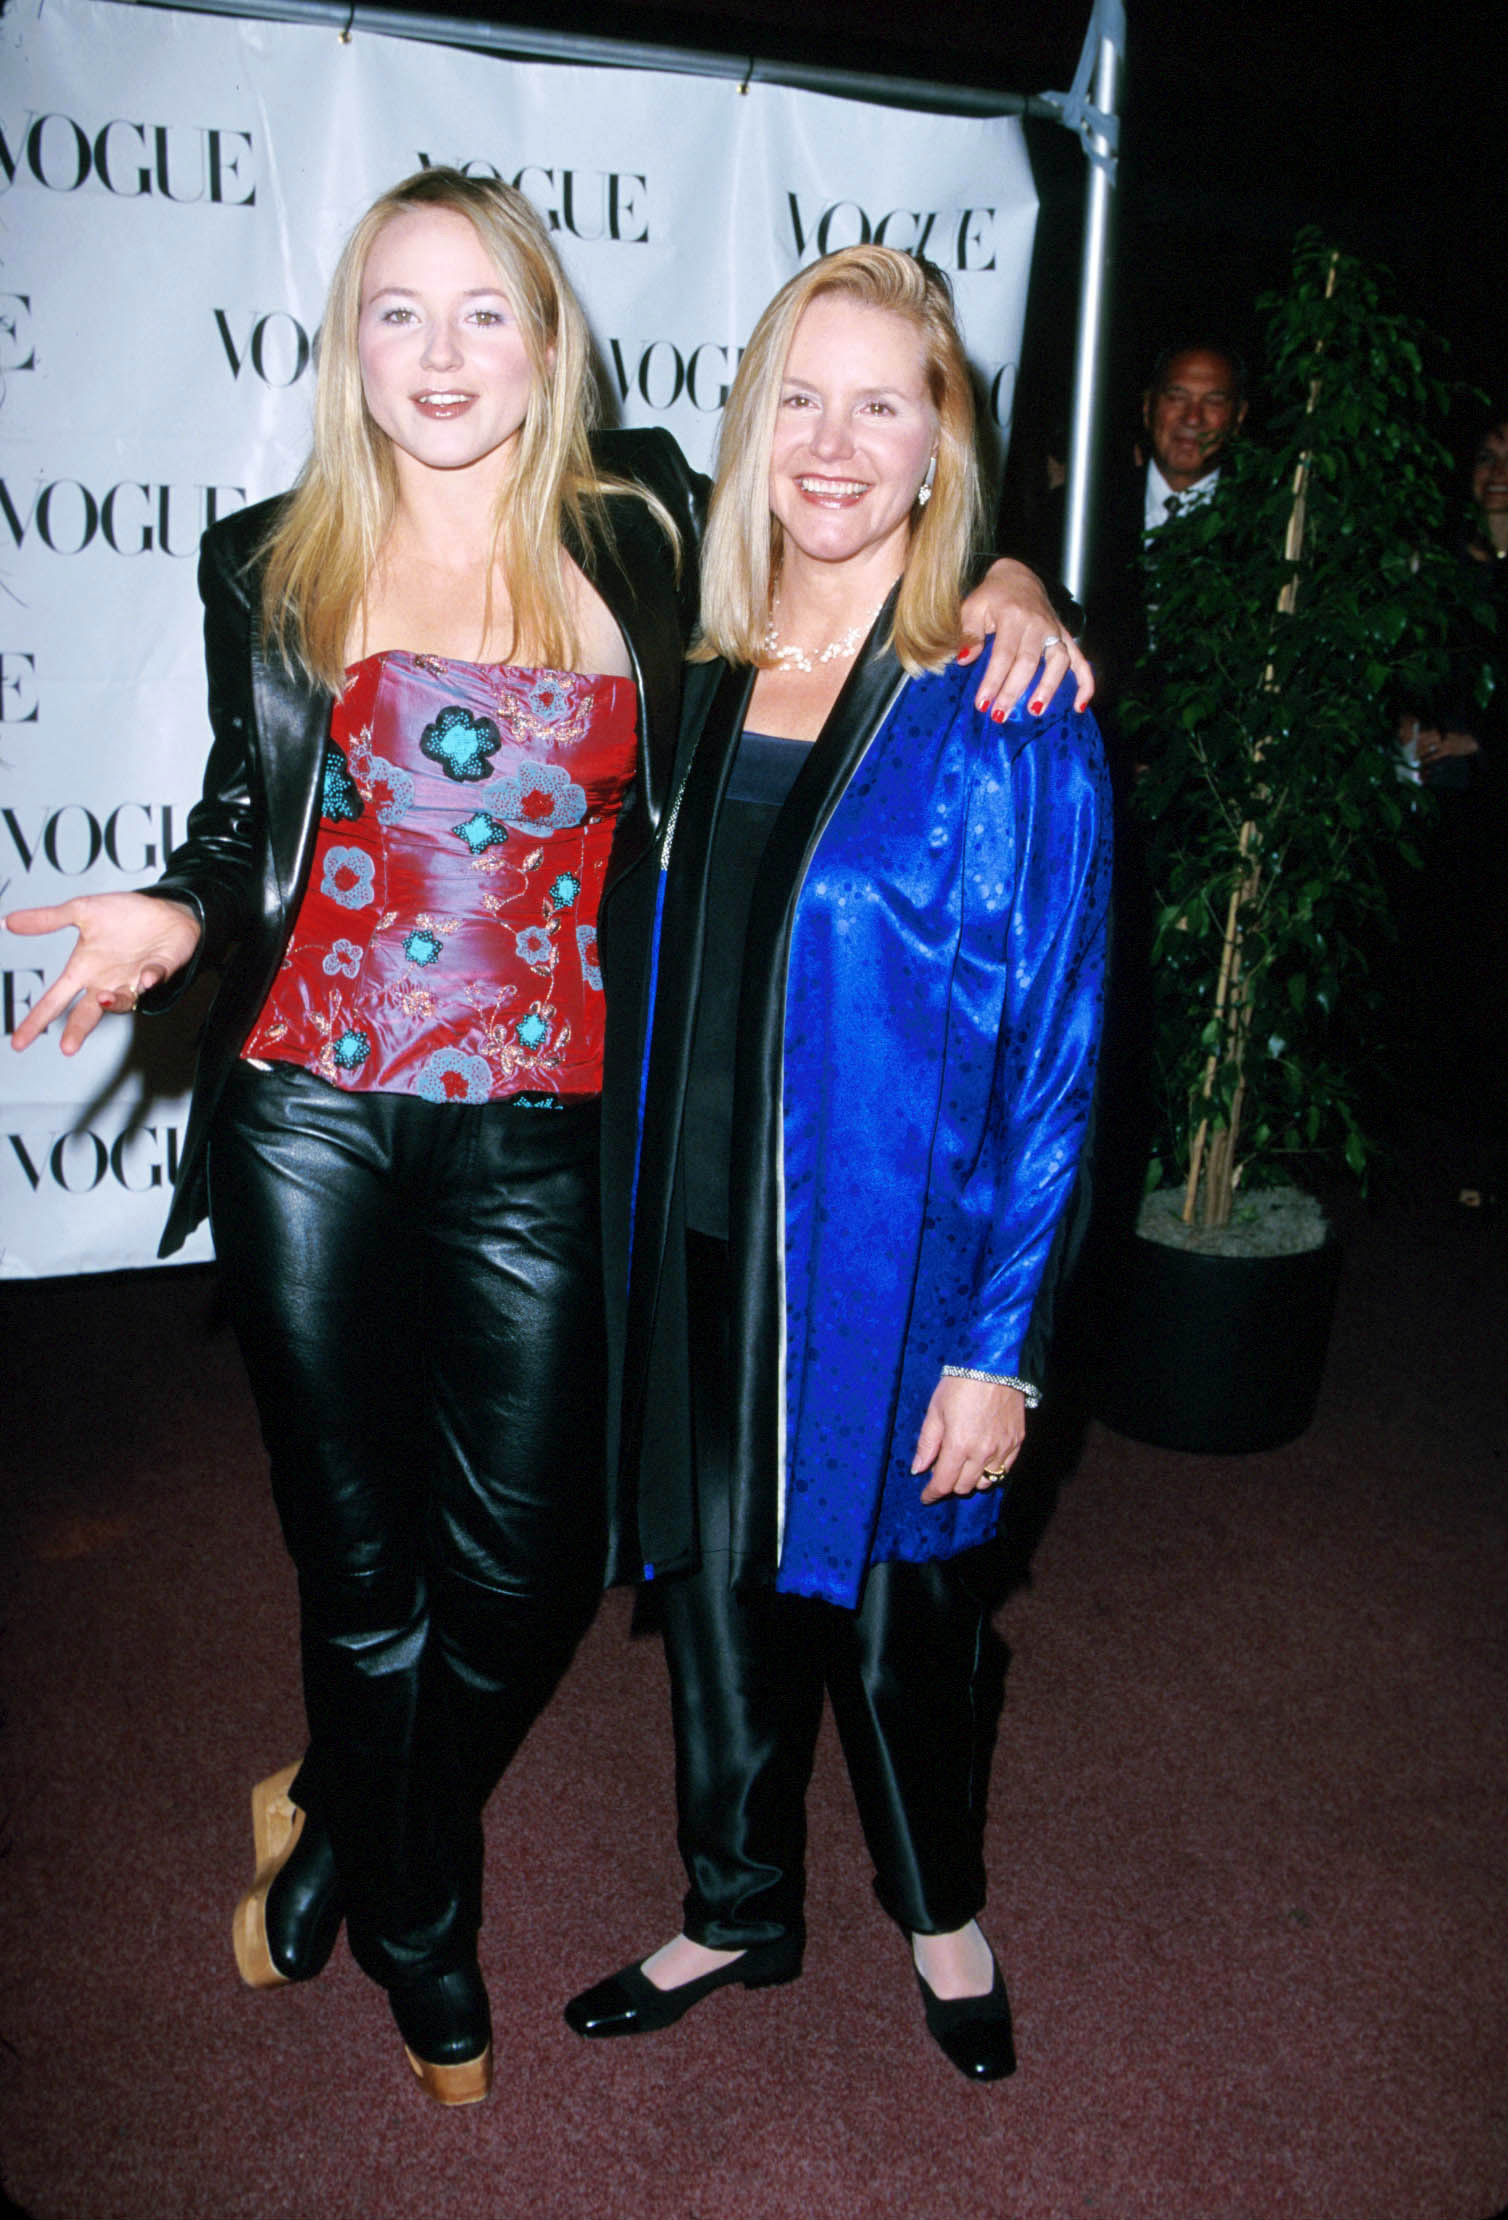 Jewel and Lenedra Caroll during the press Conference for Higher Ground for Humanity in Hollywood, California, on April 25, 1999. | Source: Getty Images